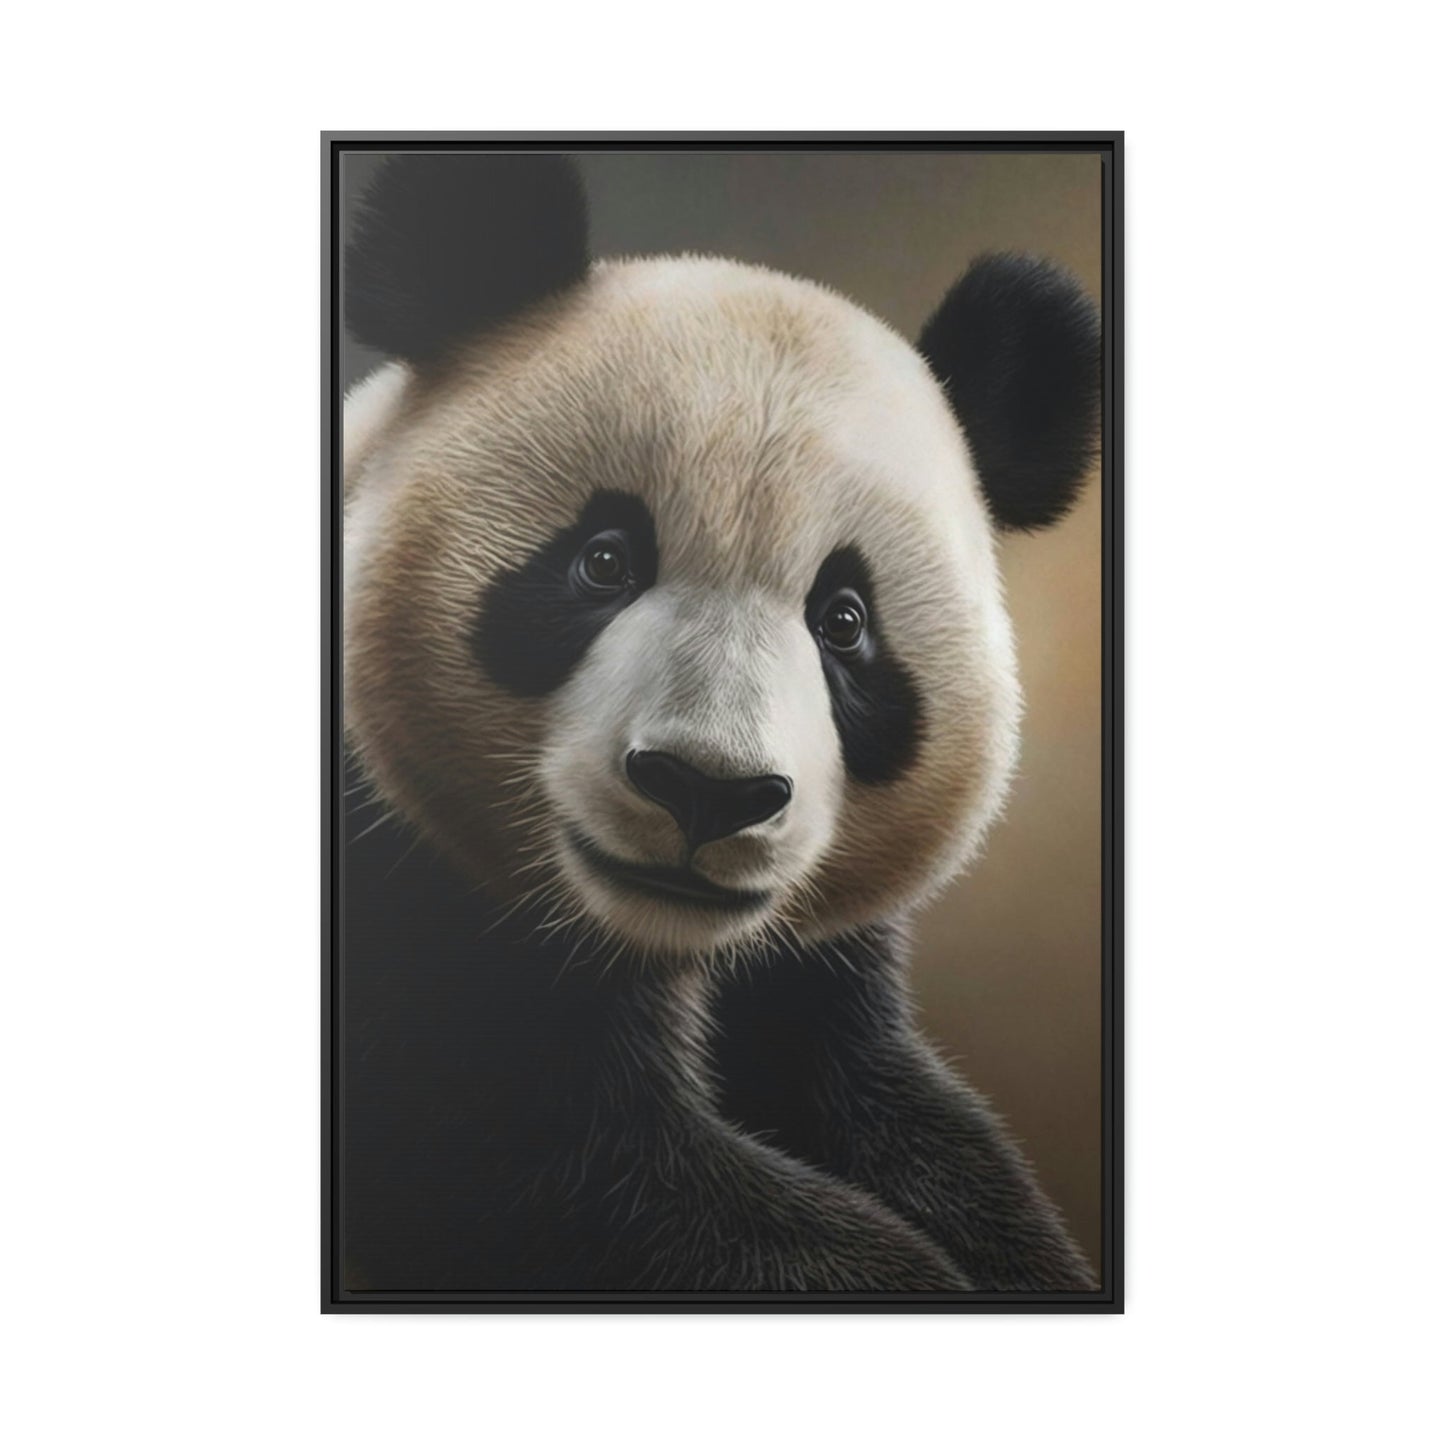 Panda at Rest: A Serene Portrait of Gentle Giant on Canvas